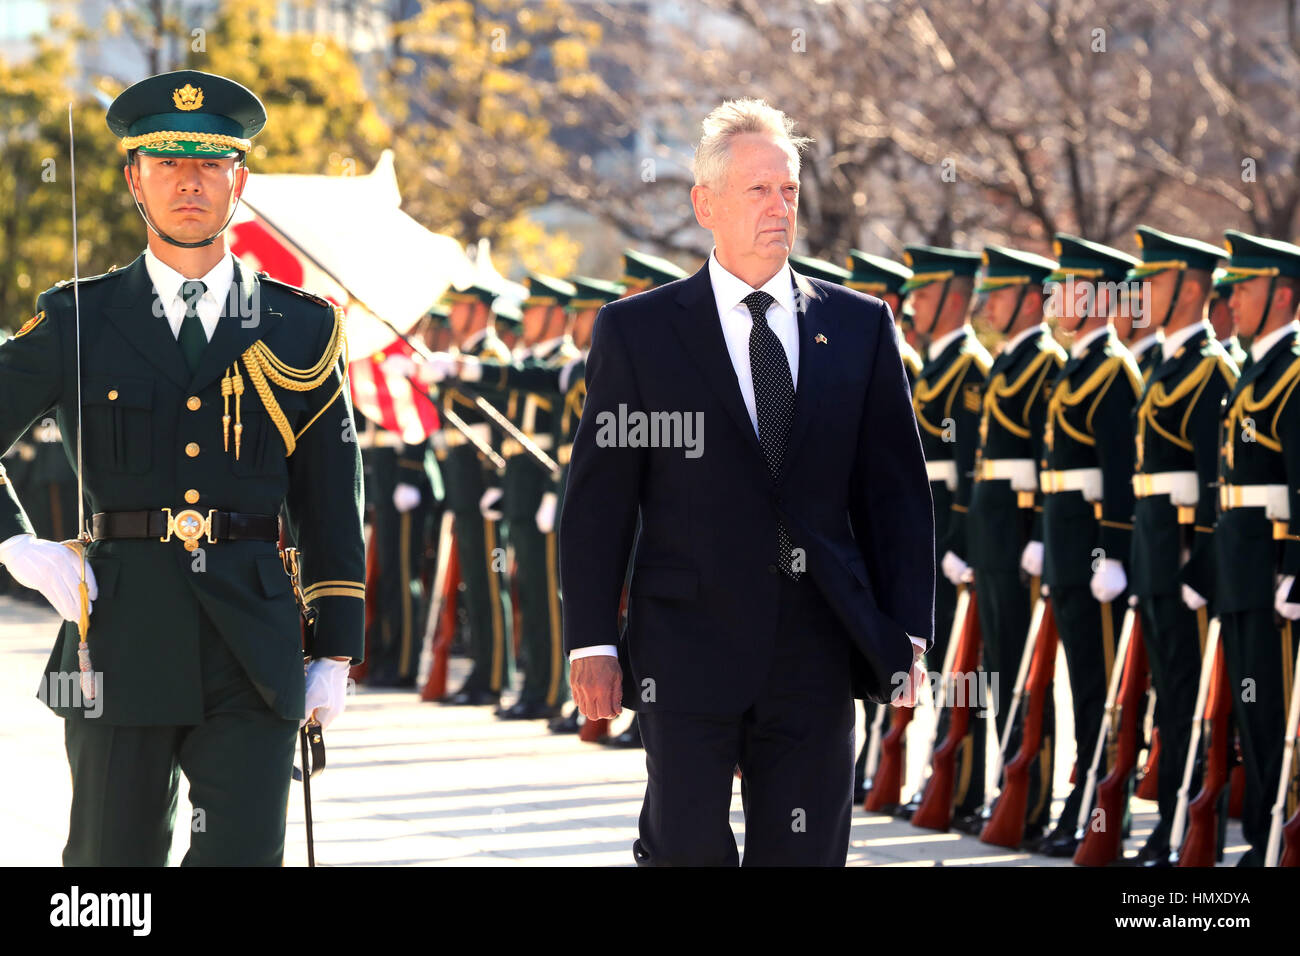 Tokyo, Japan. 4th Feb, 2017. Newly apponited U.S. Secretary of Defense James Mattis (R) accompanied by his Japanese counterpart Tomomi Inada (L) reviews the honor guards at the Defense Ministry in Tokyo on Saturday, February 4, 2017. Mattis is now here on his east Asian trip to exchange views with Japanese officials. Credit: Yoshio Tsunoda/AFLO/Alamy Live News Stock Photo